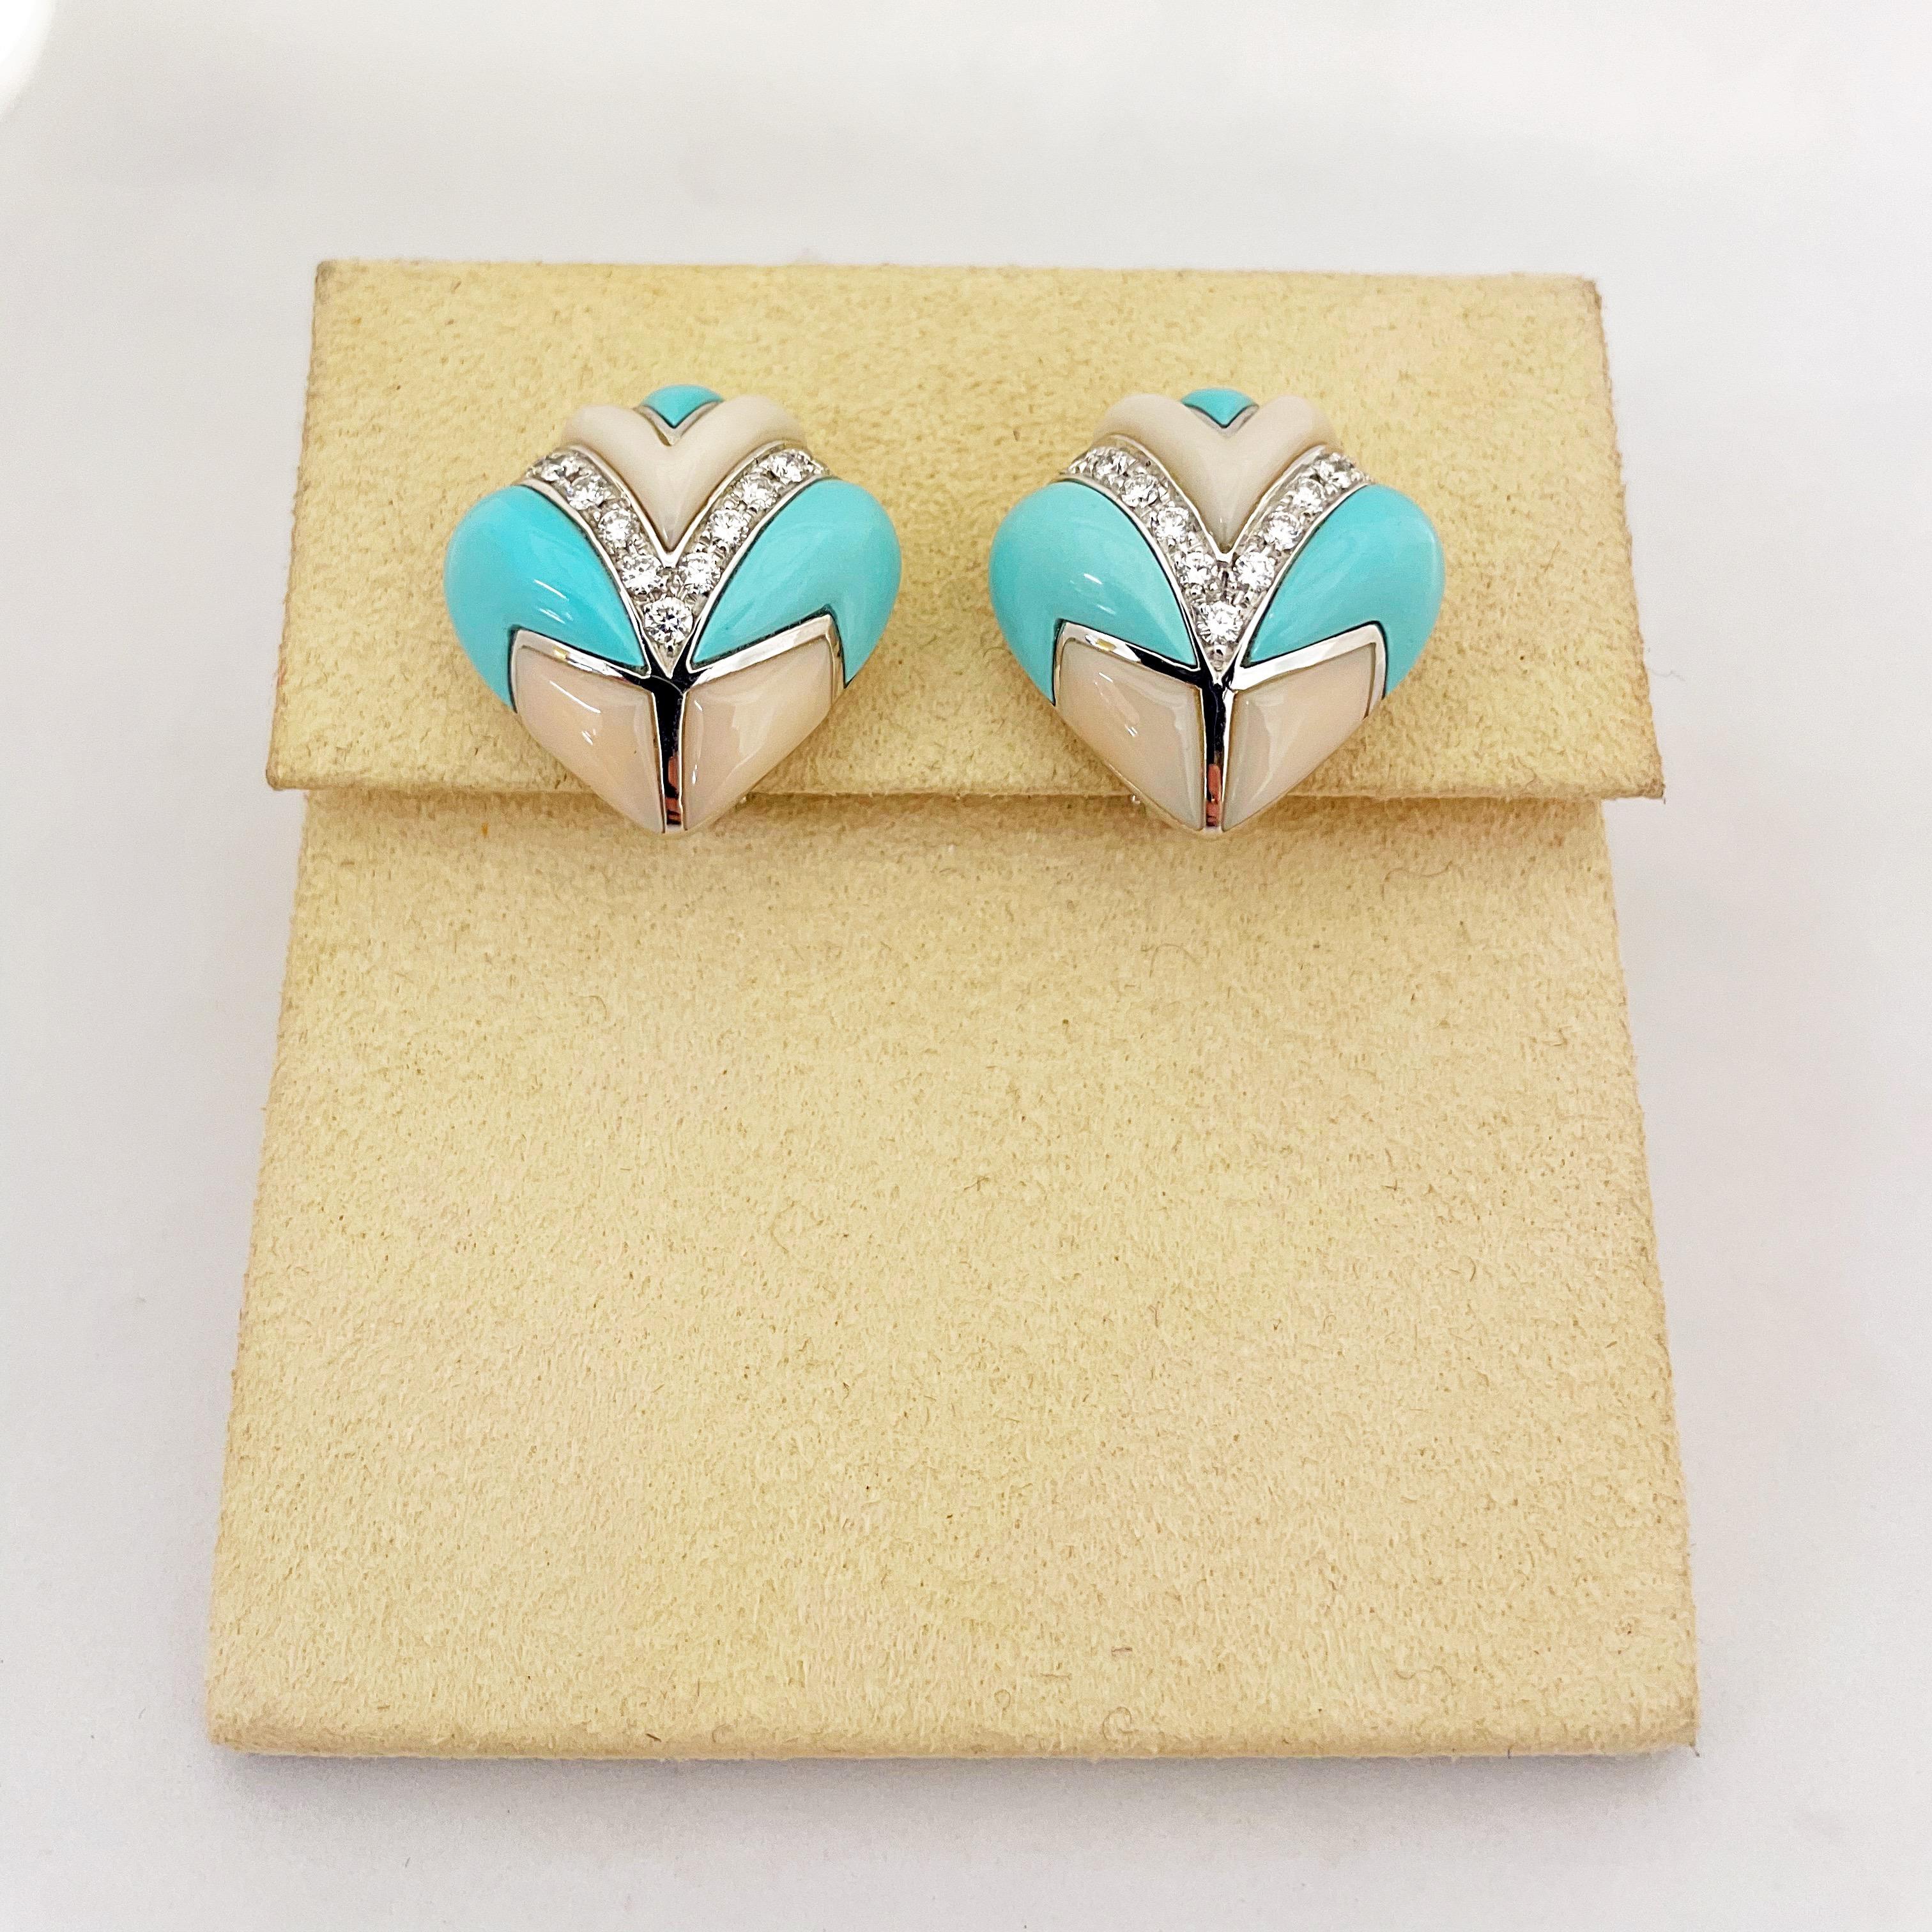 These stunning 18KT white gold  earrings were designed by renowned Italian Jewelers Oro Trend  for Cellini Jewelers. They have a strong Art Deco influence with their inlaid angular stones in turquoise and a very pale pink coral.The center is set